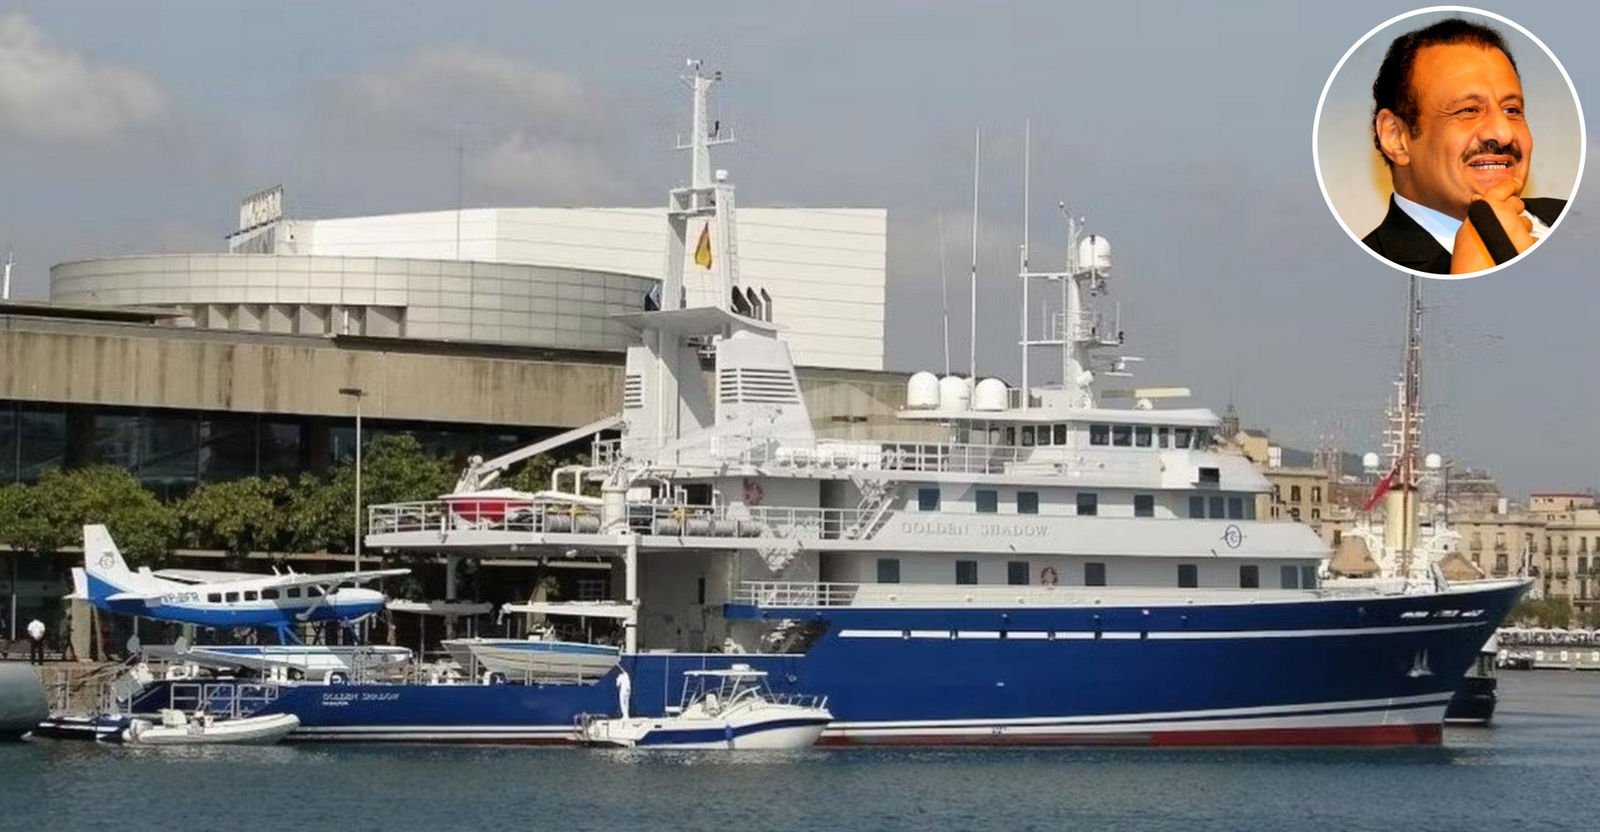 While Jeff Bezos’ Koru yacht’s support vessel has a helipad for his fiancée to pilot a chopper, this Saudi prince’s 219-foot-long support vessel can carry and launch a seaplane. Being an avid scuba diver, the royal has also installed a marine exploration lab on the boat.